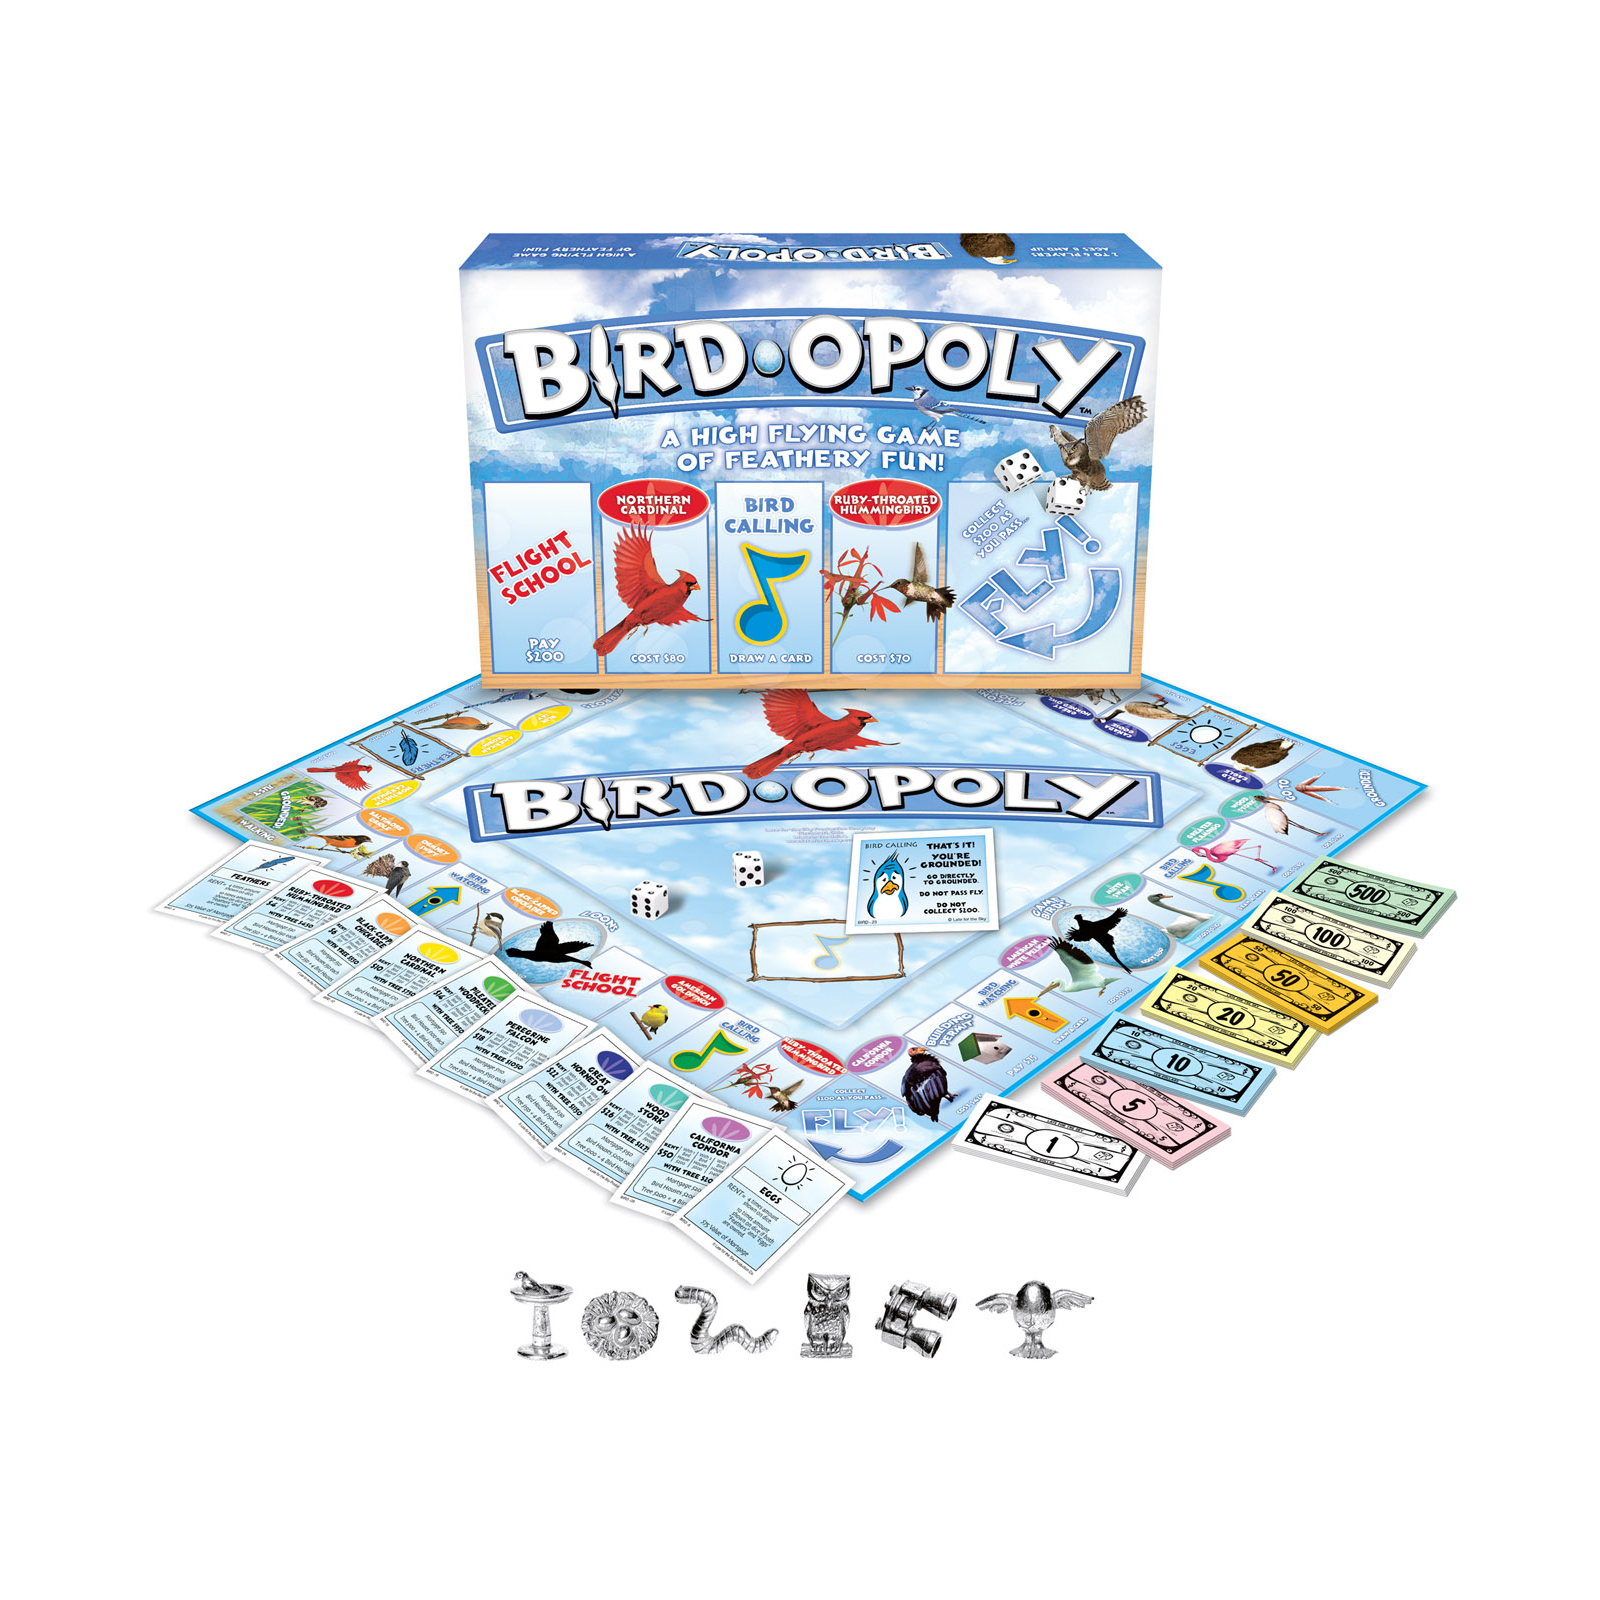 Bird-Opoly Board Game offered by Distribution Solutions - image 1 of 2